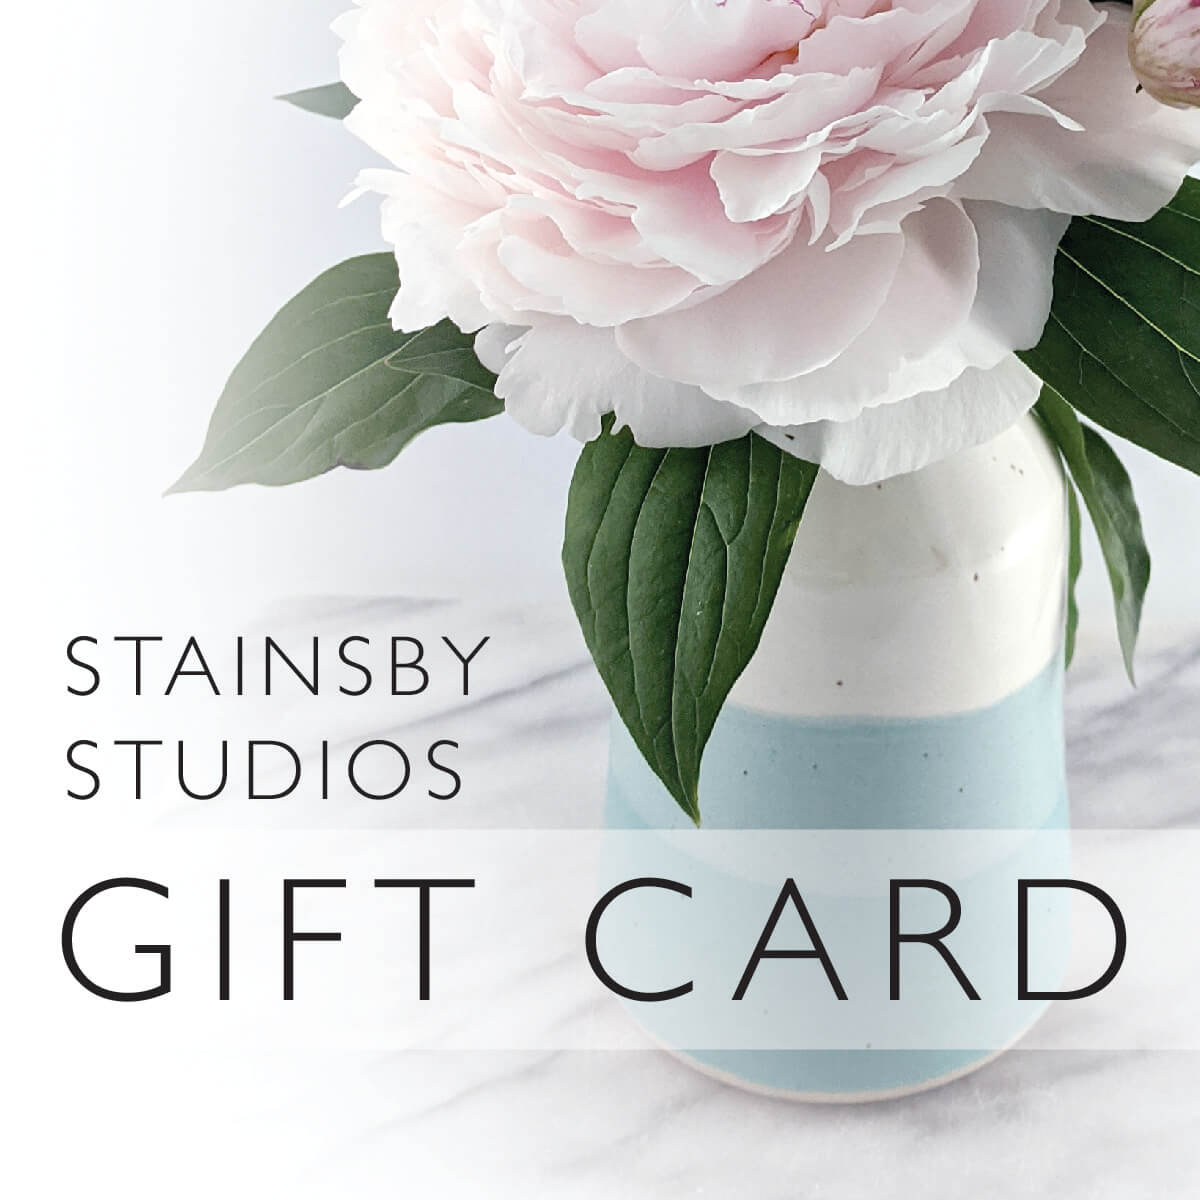 Stainsby Studios Gift Card